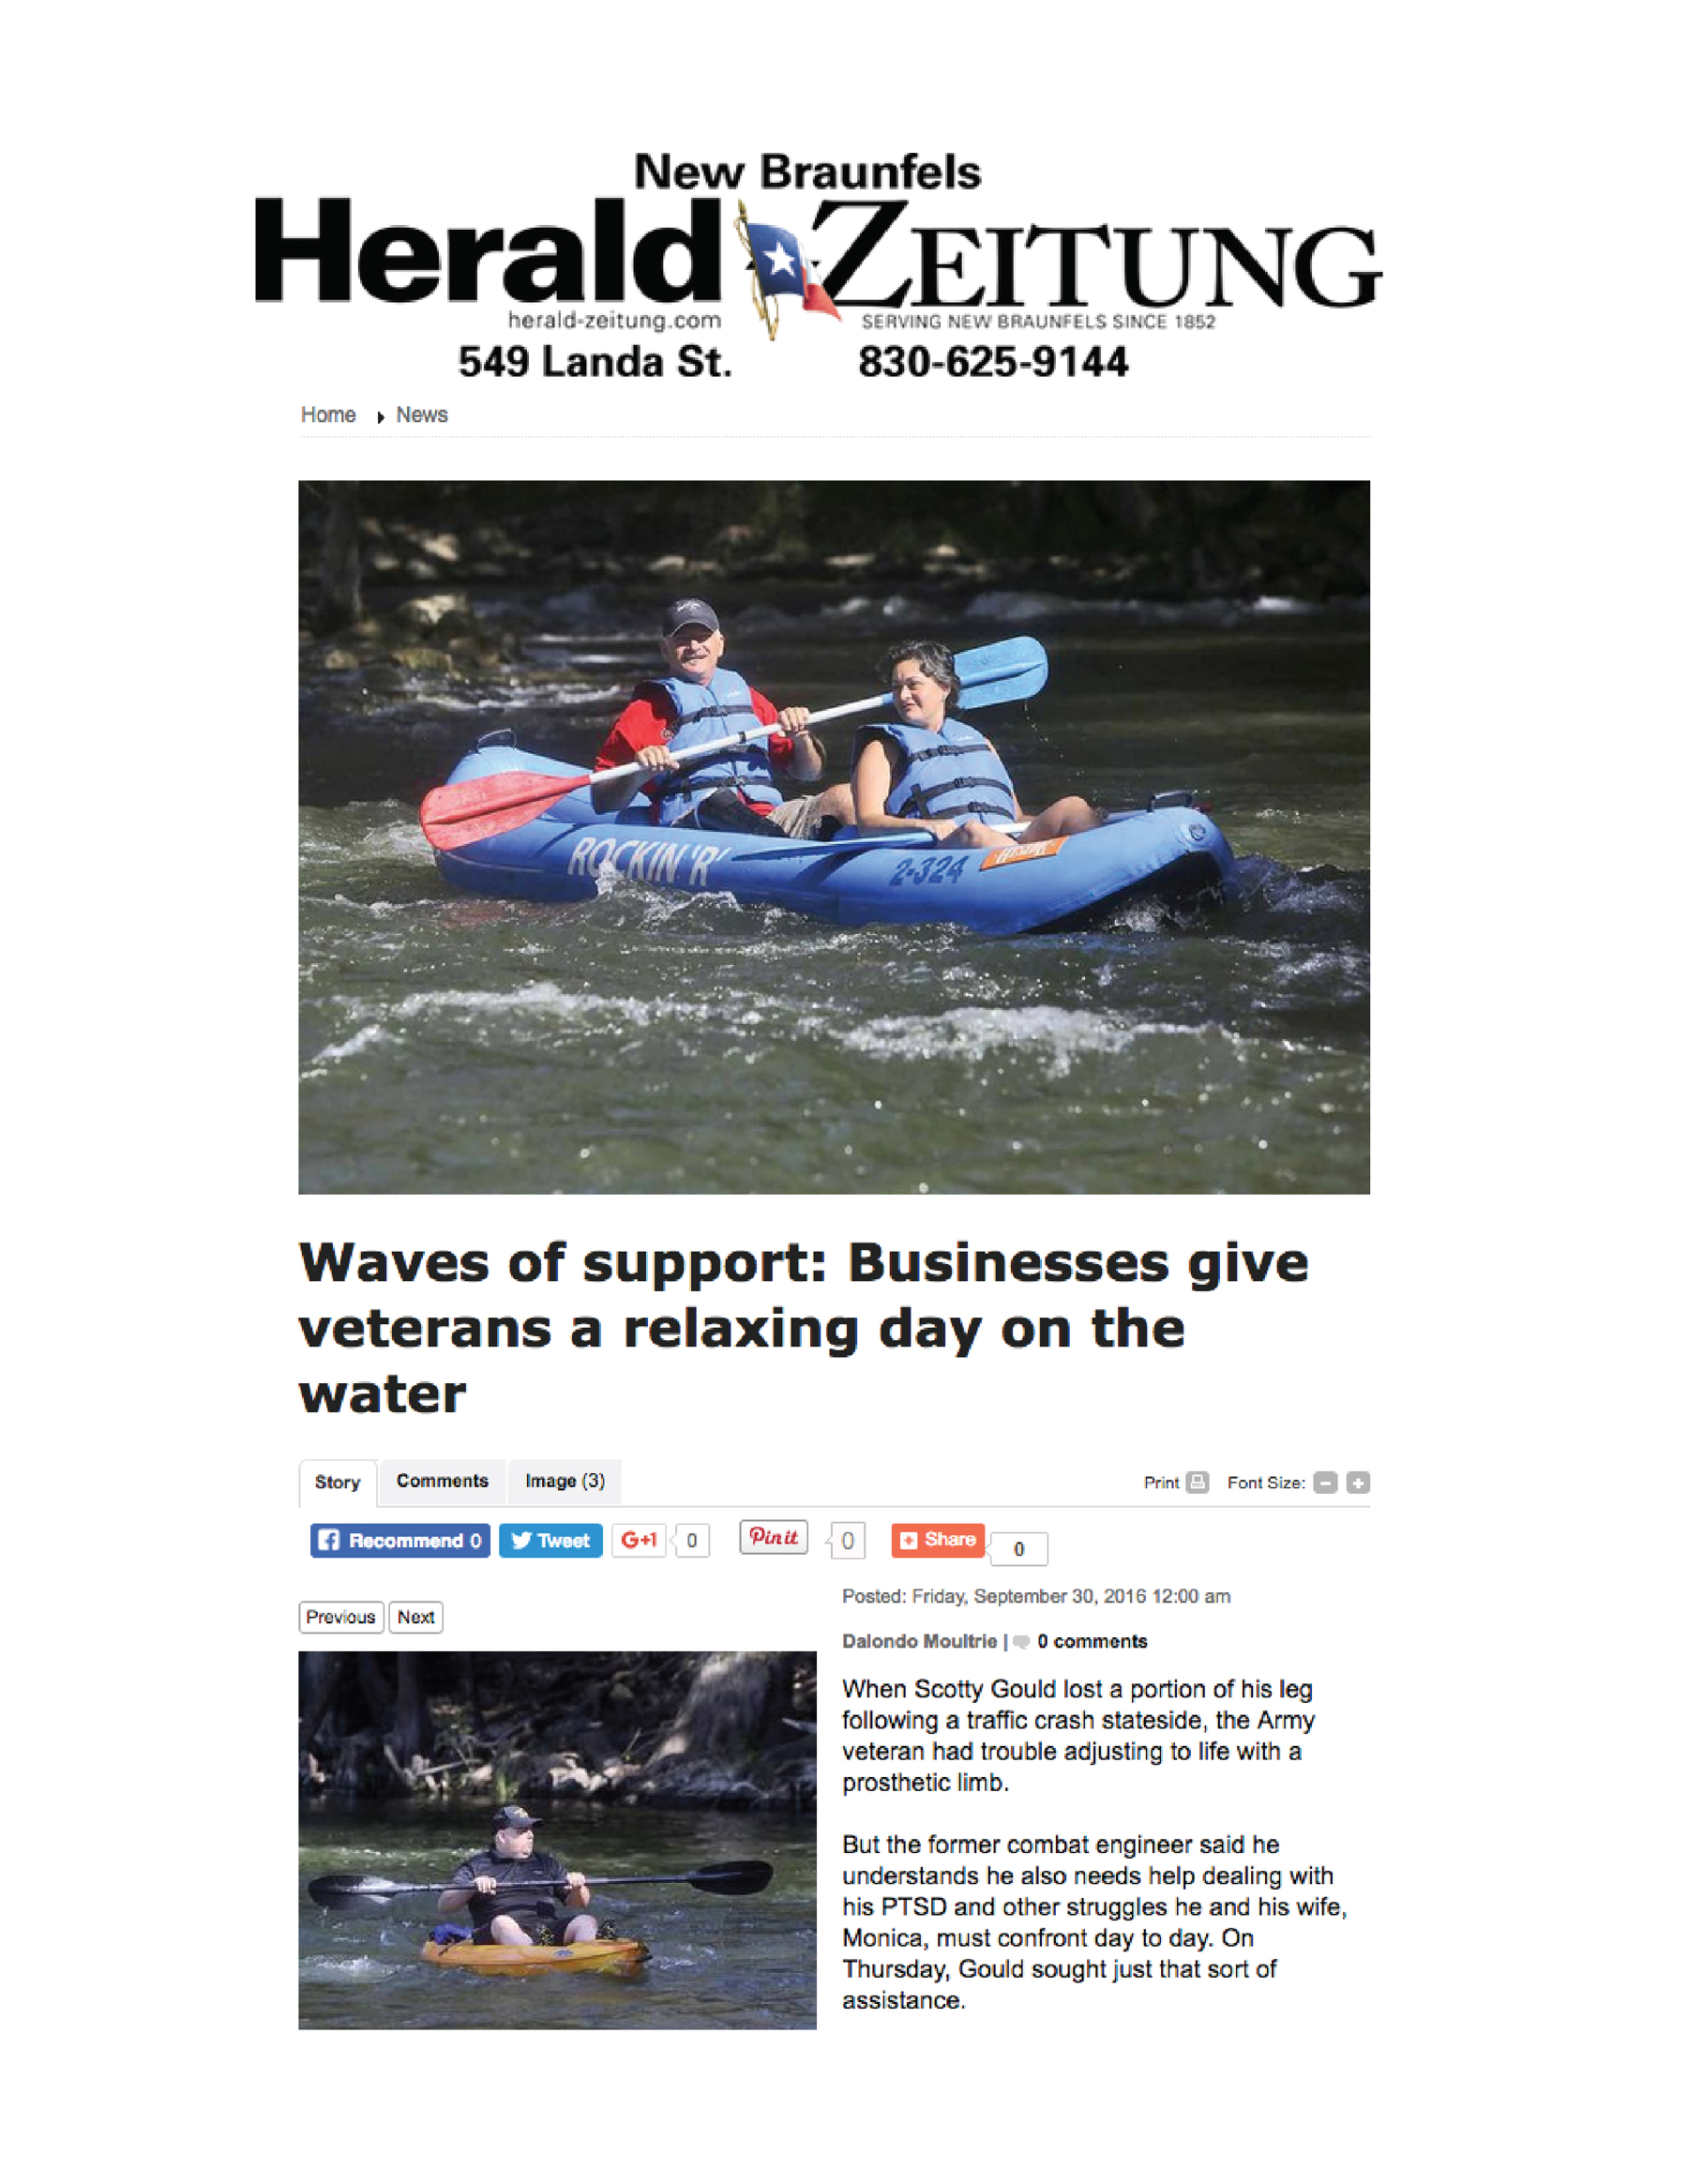 A newspaper article about local business supporting area veterans